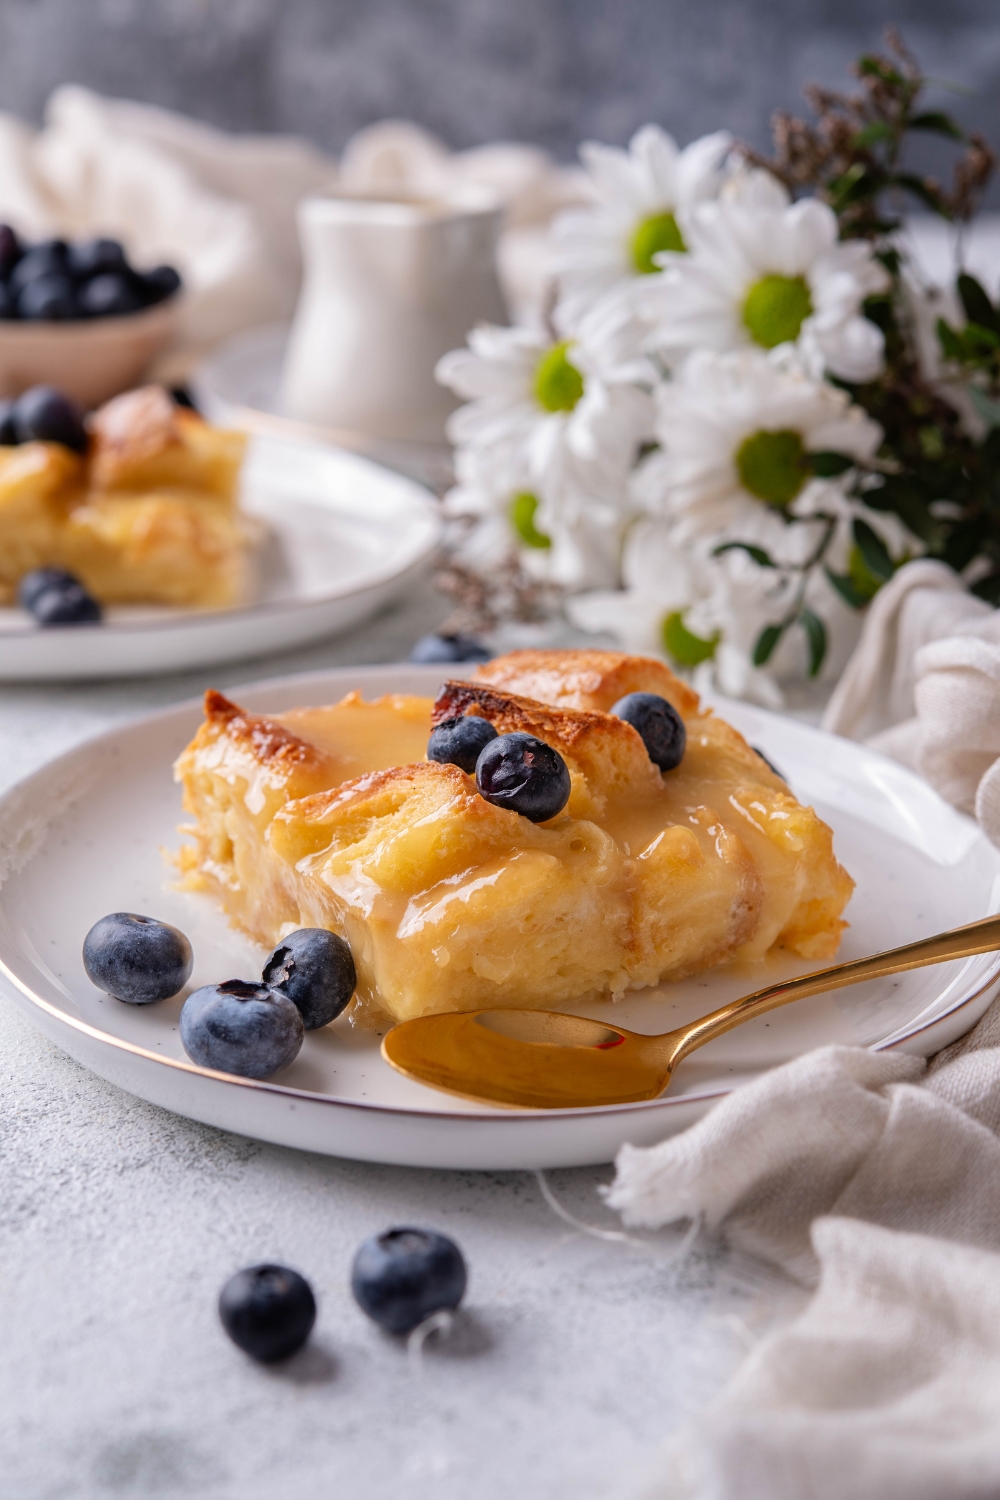 A slice of bread pudding with vanilla sauce and blueberries on a plate, in front of a second plate of bread pudding and blueberries.